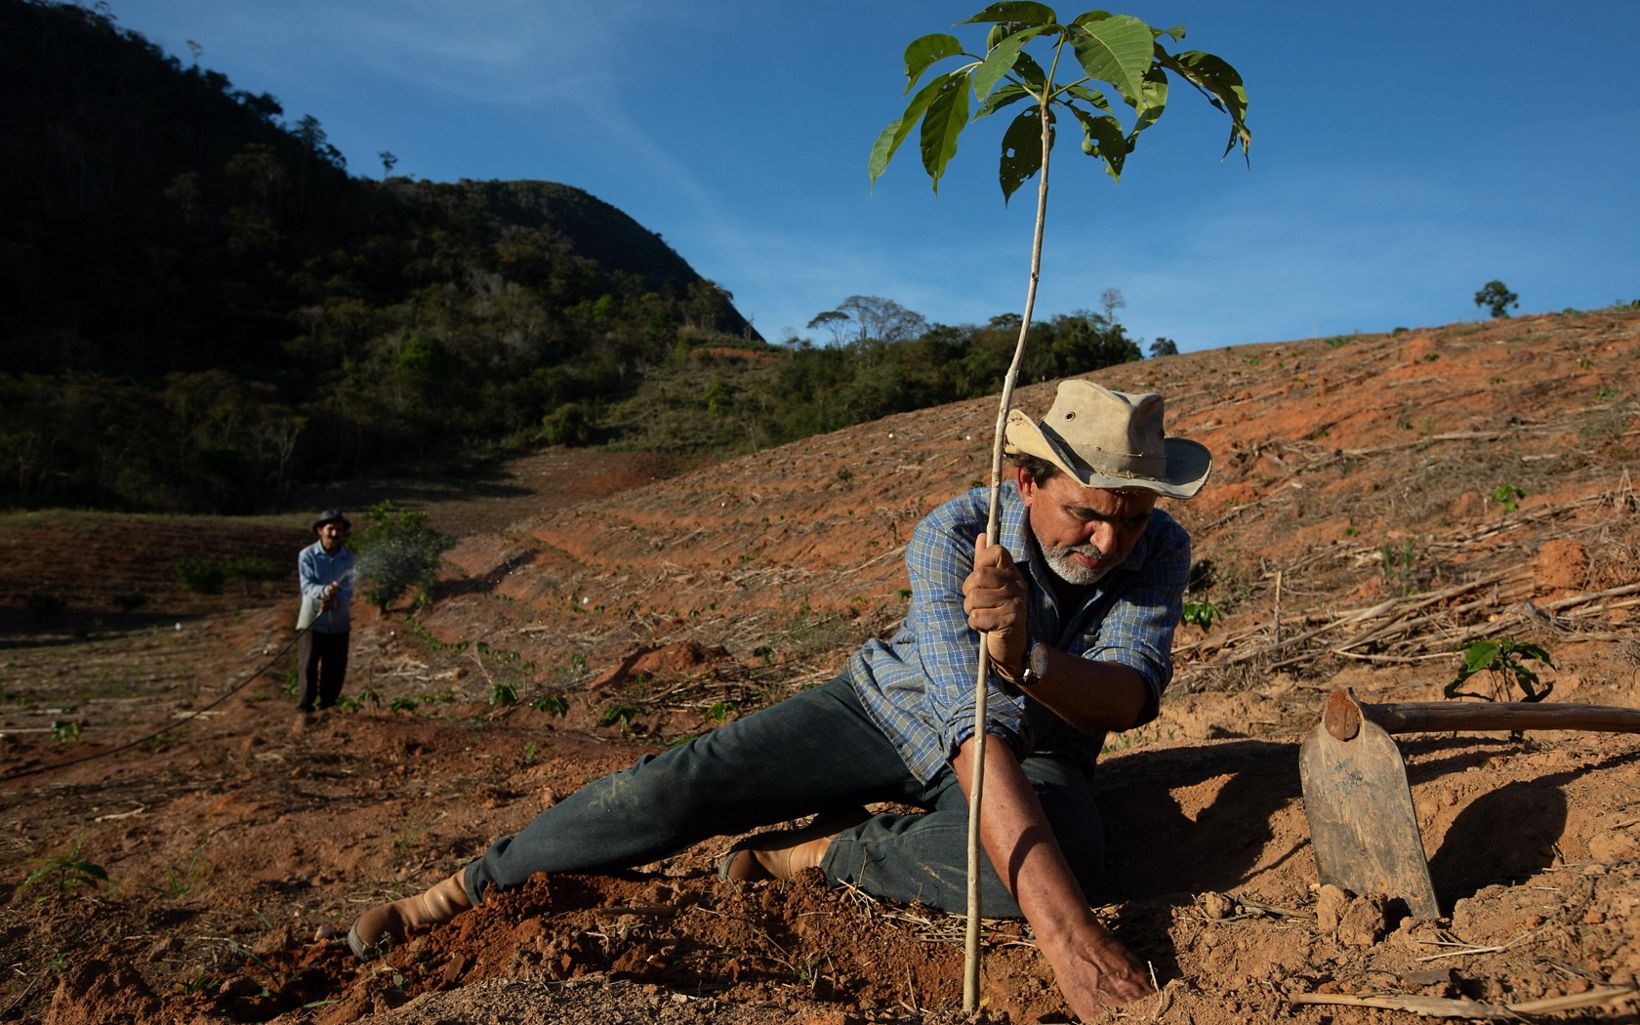 Adolfo Littiga planting a native tree on the farm he also grew up on. Adolfo develops agroforestry systems as part of the Reflorestar program.